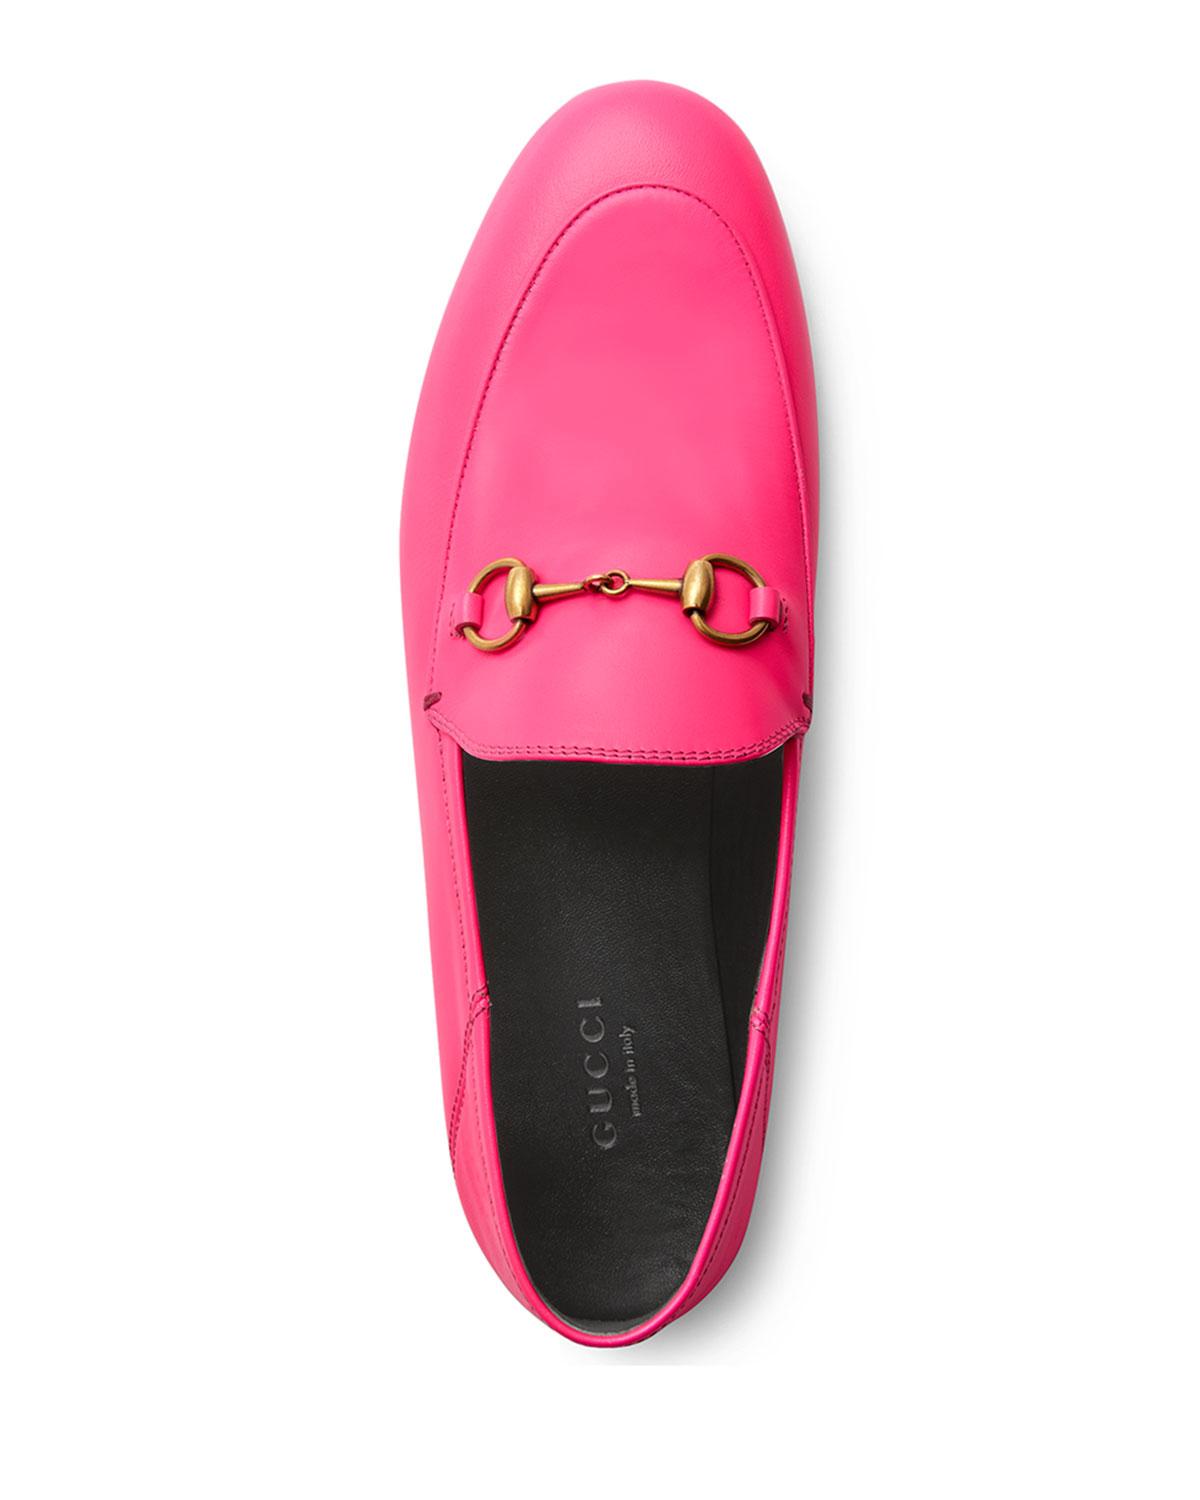 Gucci Brixton Neon Leather Horsebit Loafers in Bright Pink (Pink) - Lyst